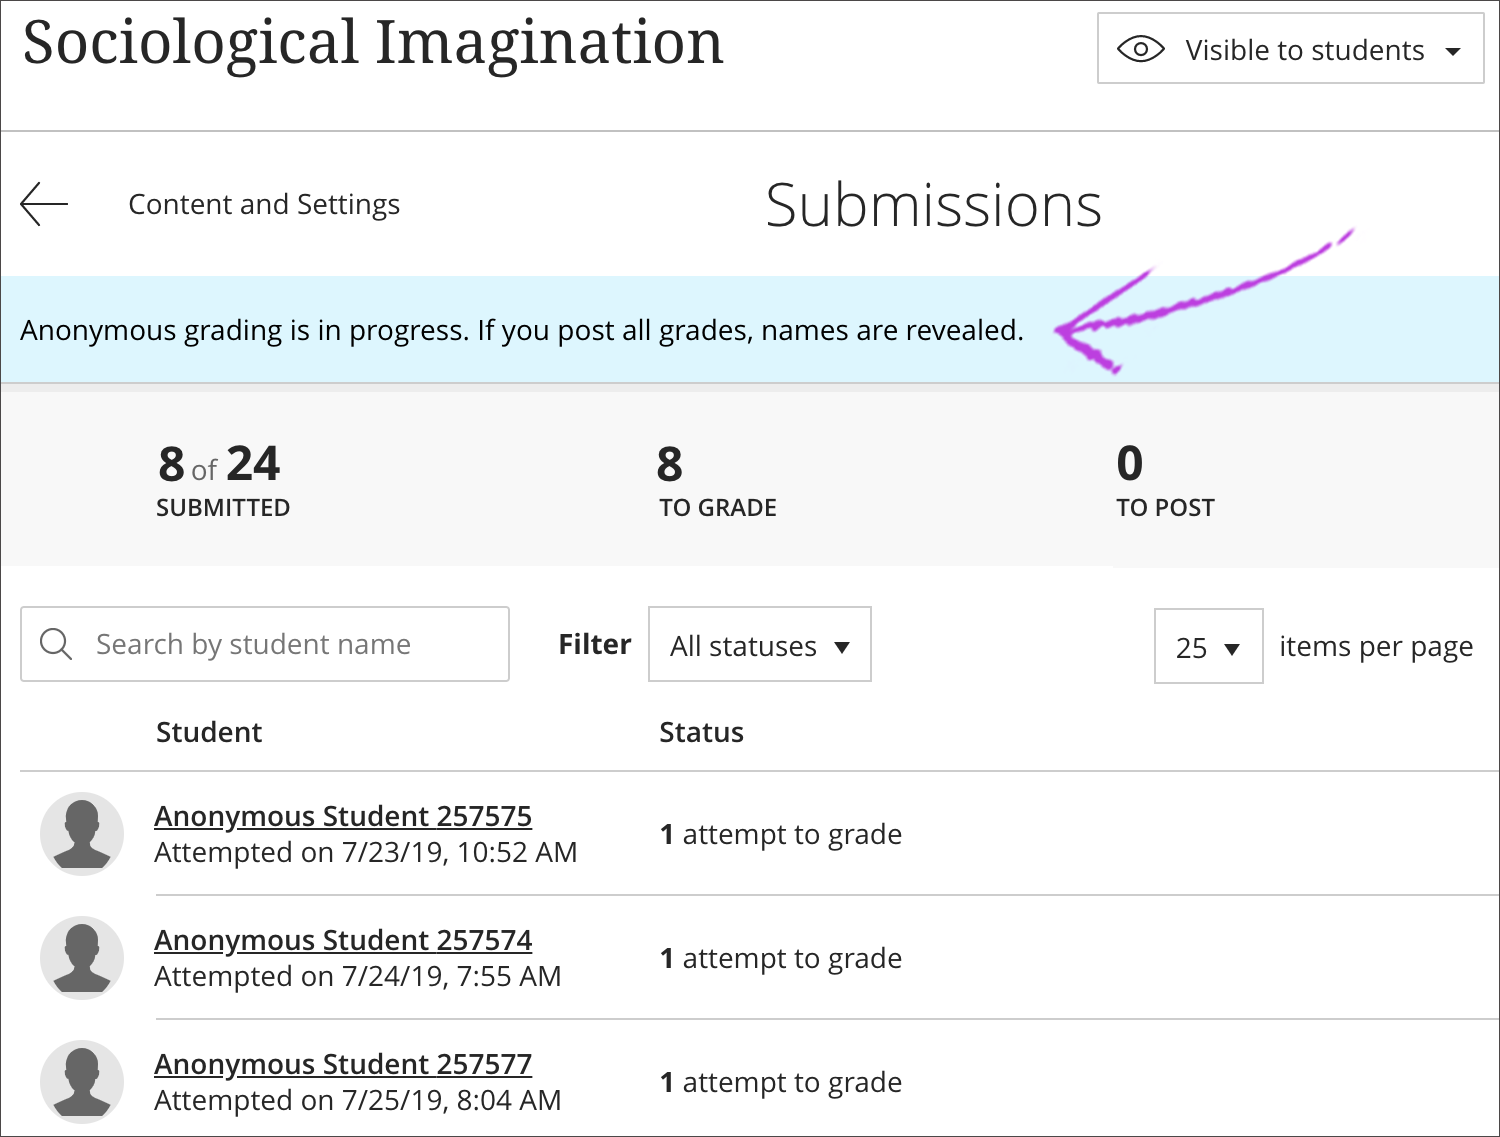 The Submissions page is open with the submission list on screen. The notification that indicates the anonymous grading is in progress is highlighted.